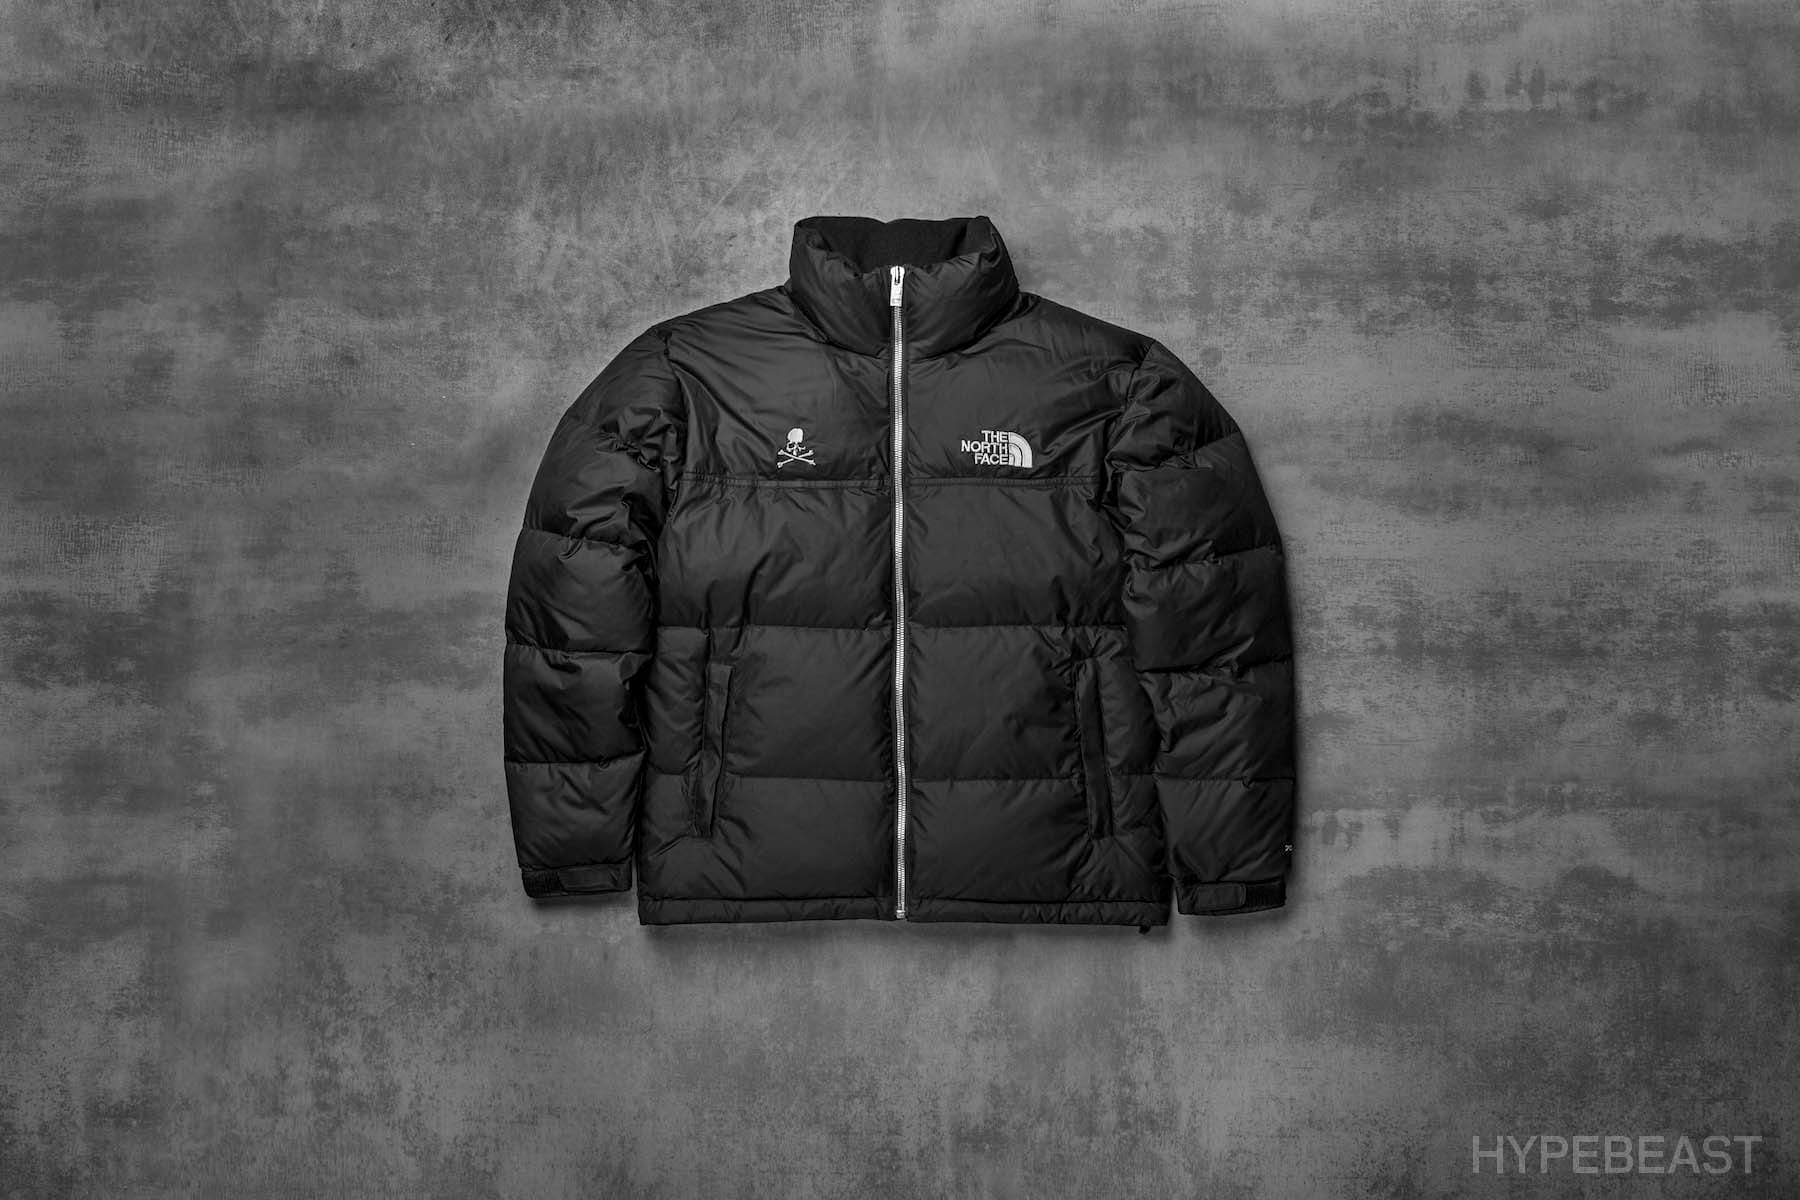 the north face mastermind price